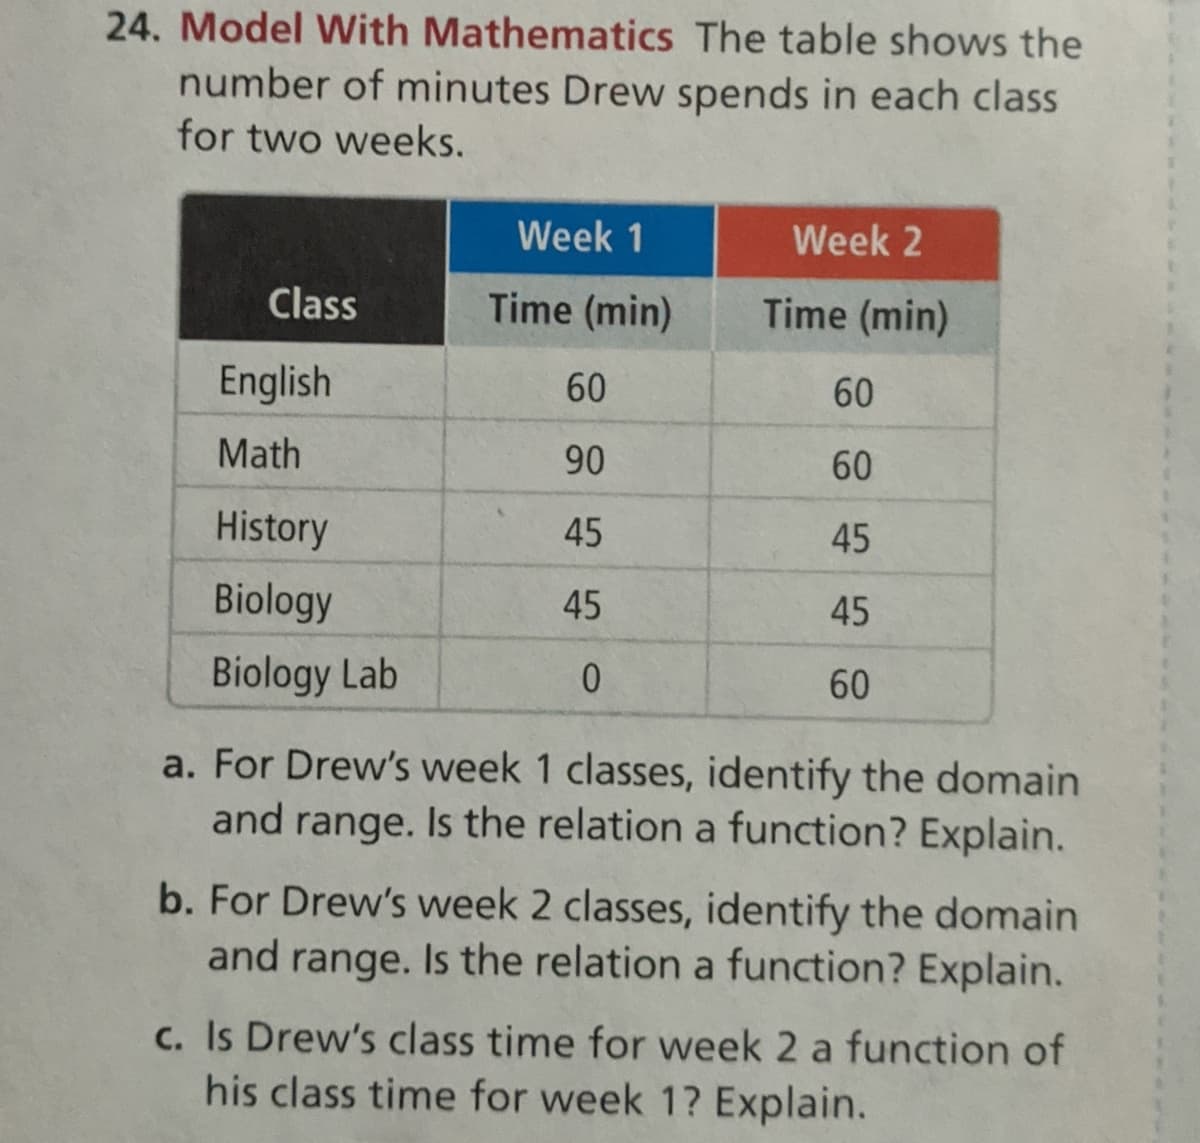 24. Model With Mathematics The table shows the
number of minutes Drew spends in each class
for two weeks.
Week 1
Week 2
Class
Time (min)
Time (min)
English
60
60
Math
90
60
History
45
45
Biology
45
45
Biology Lab
60
a. For Drew's week 1 classes, identify the domain
and range. Is the relation a function? Explain.
b. For Drew's week 2 classes, identify the domain
and range. Is the relation a function? Explain.
c. Is Drew's class time for week 2 a function of
his class time for week 1? Explain.
